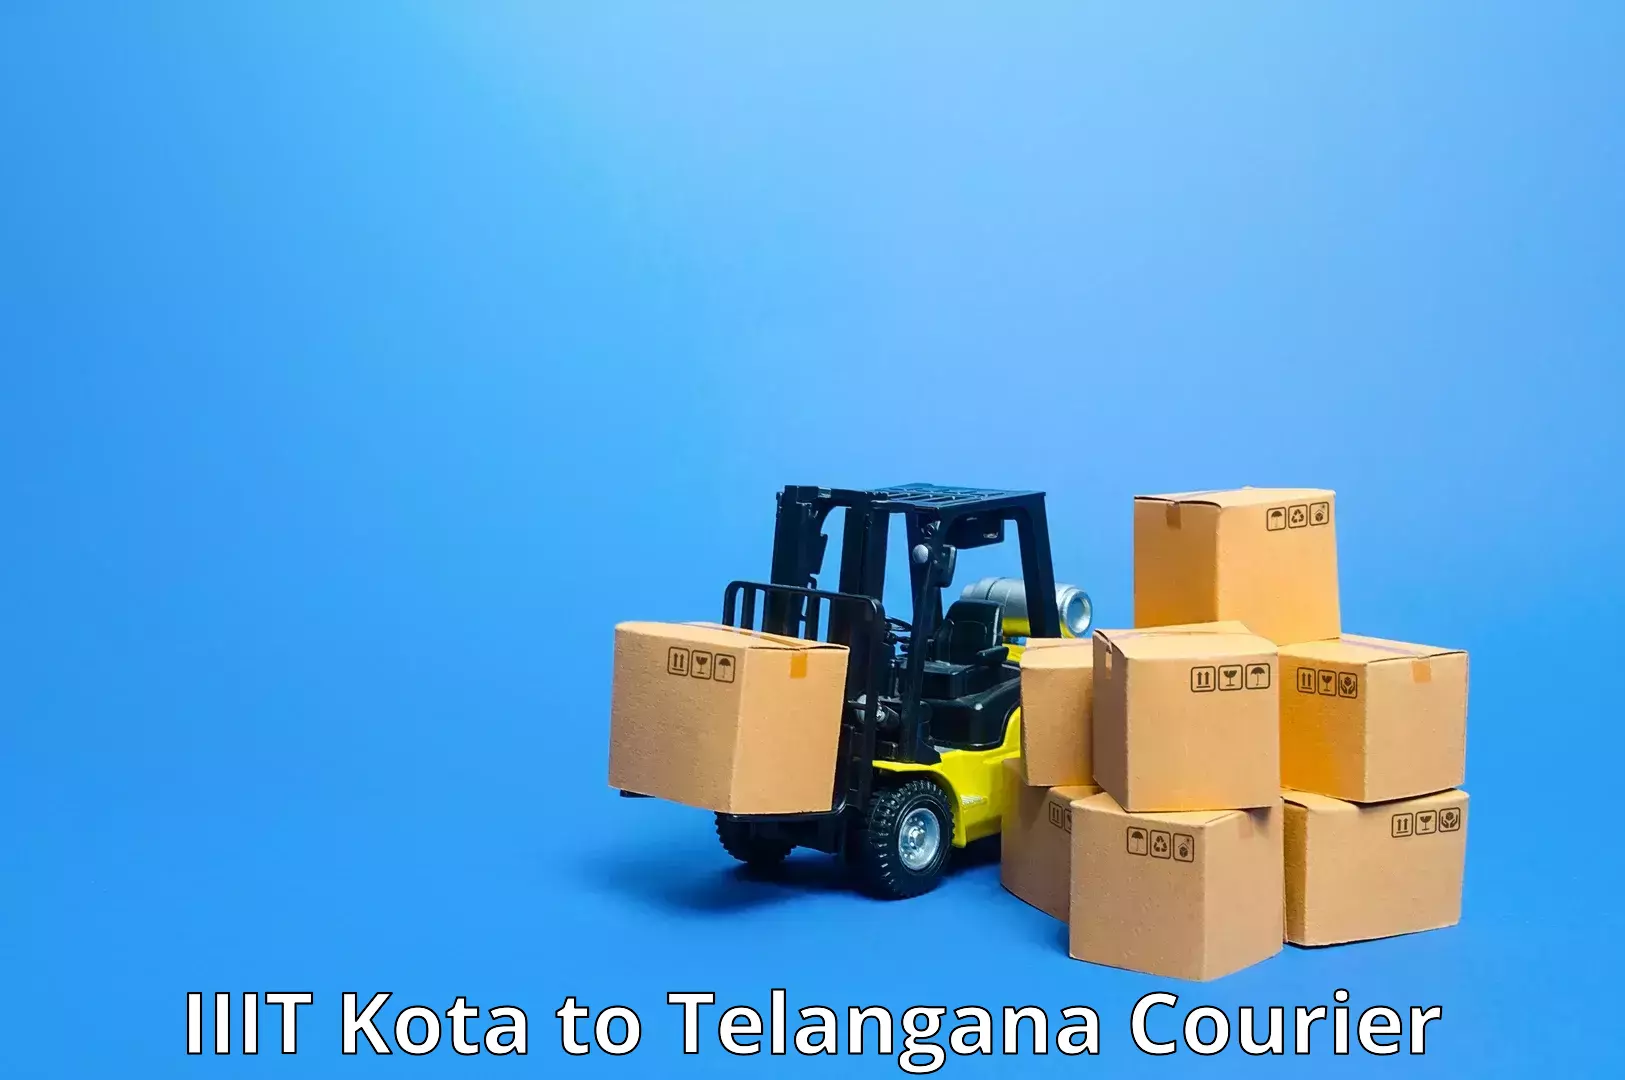 Overnight delivery services IIIT Kota to Manneguda